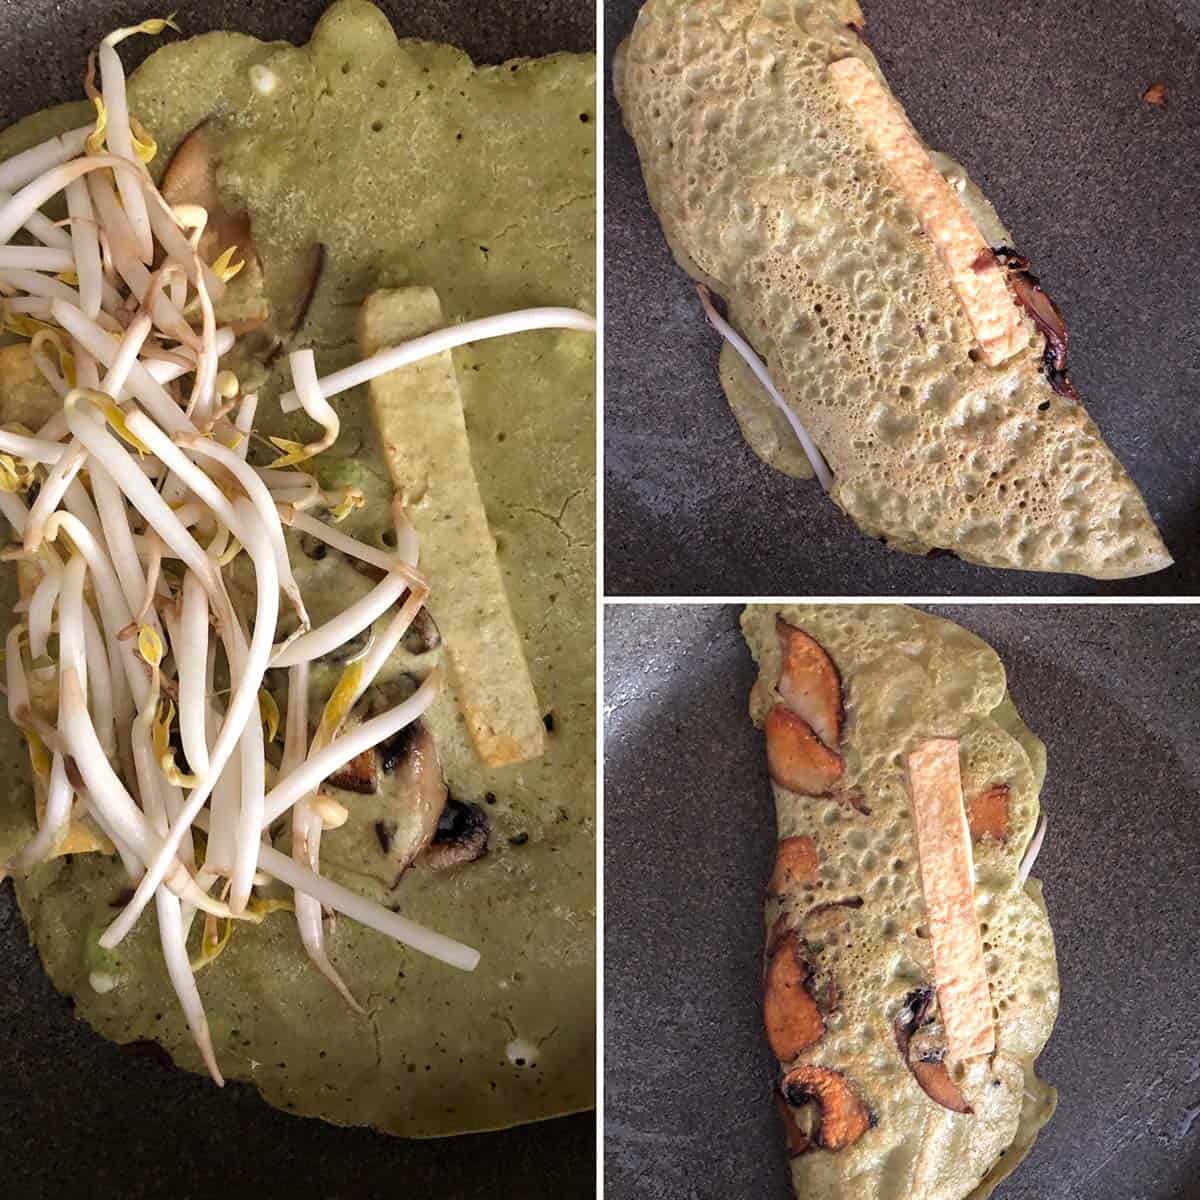 3 panel photo showing the addition of veggies in pancake.